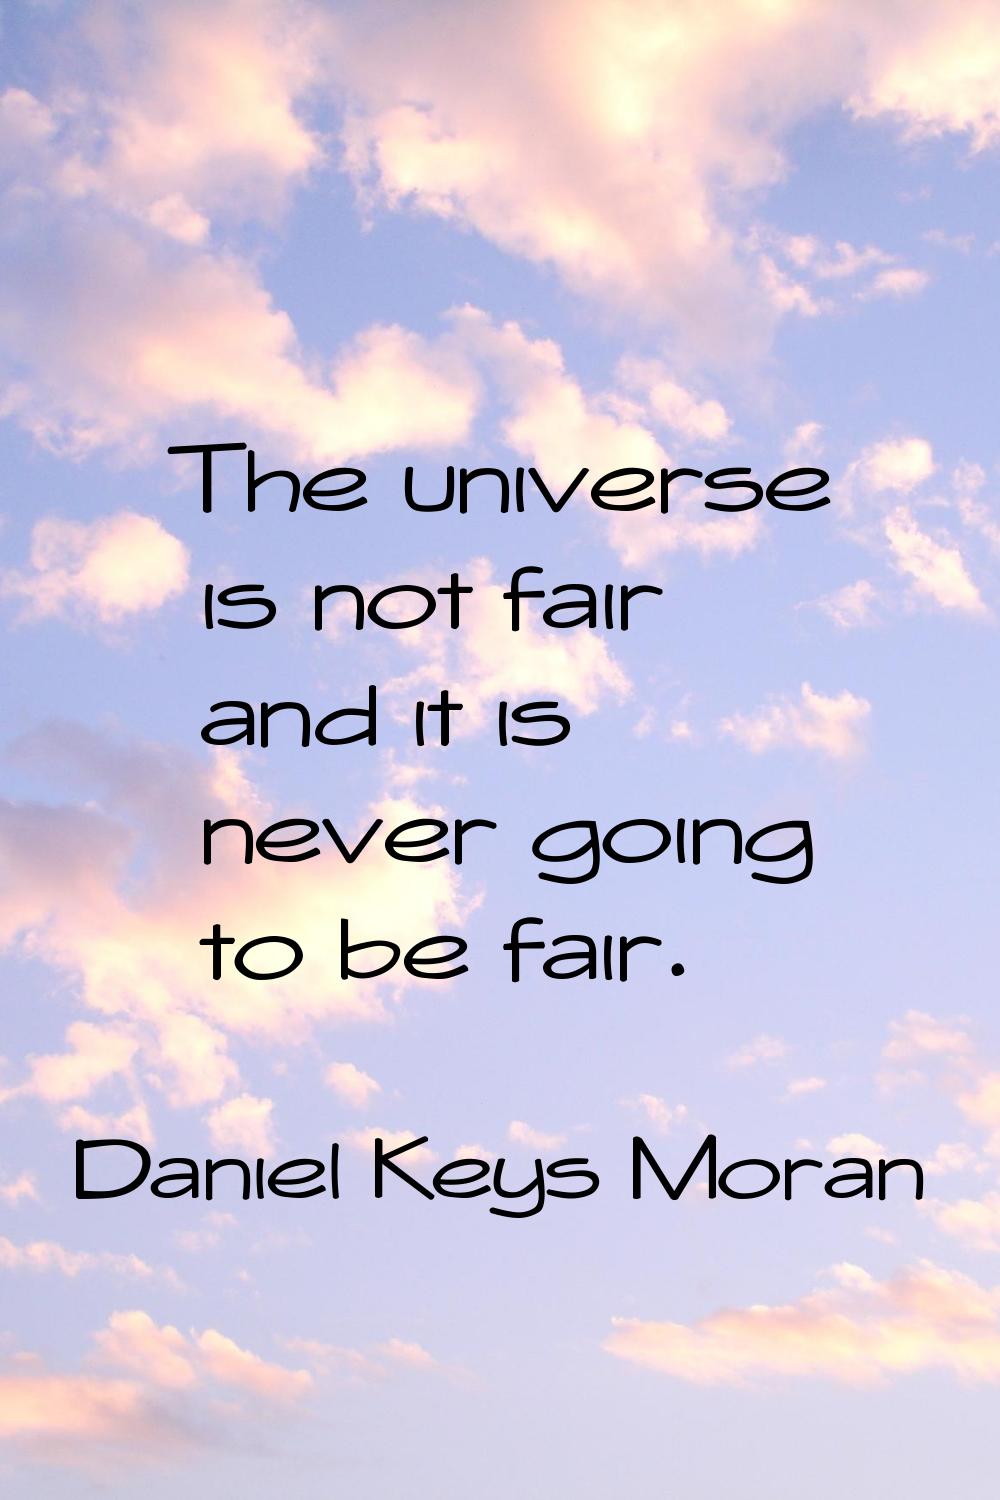 The universe is not fair and it is never going to be fair.